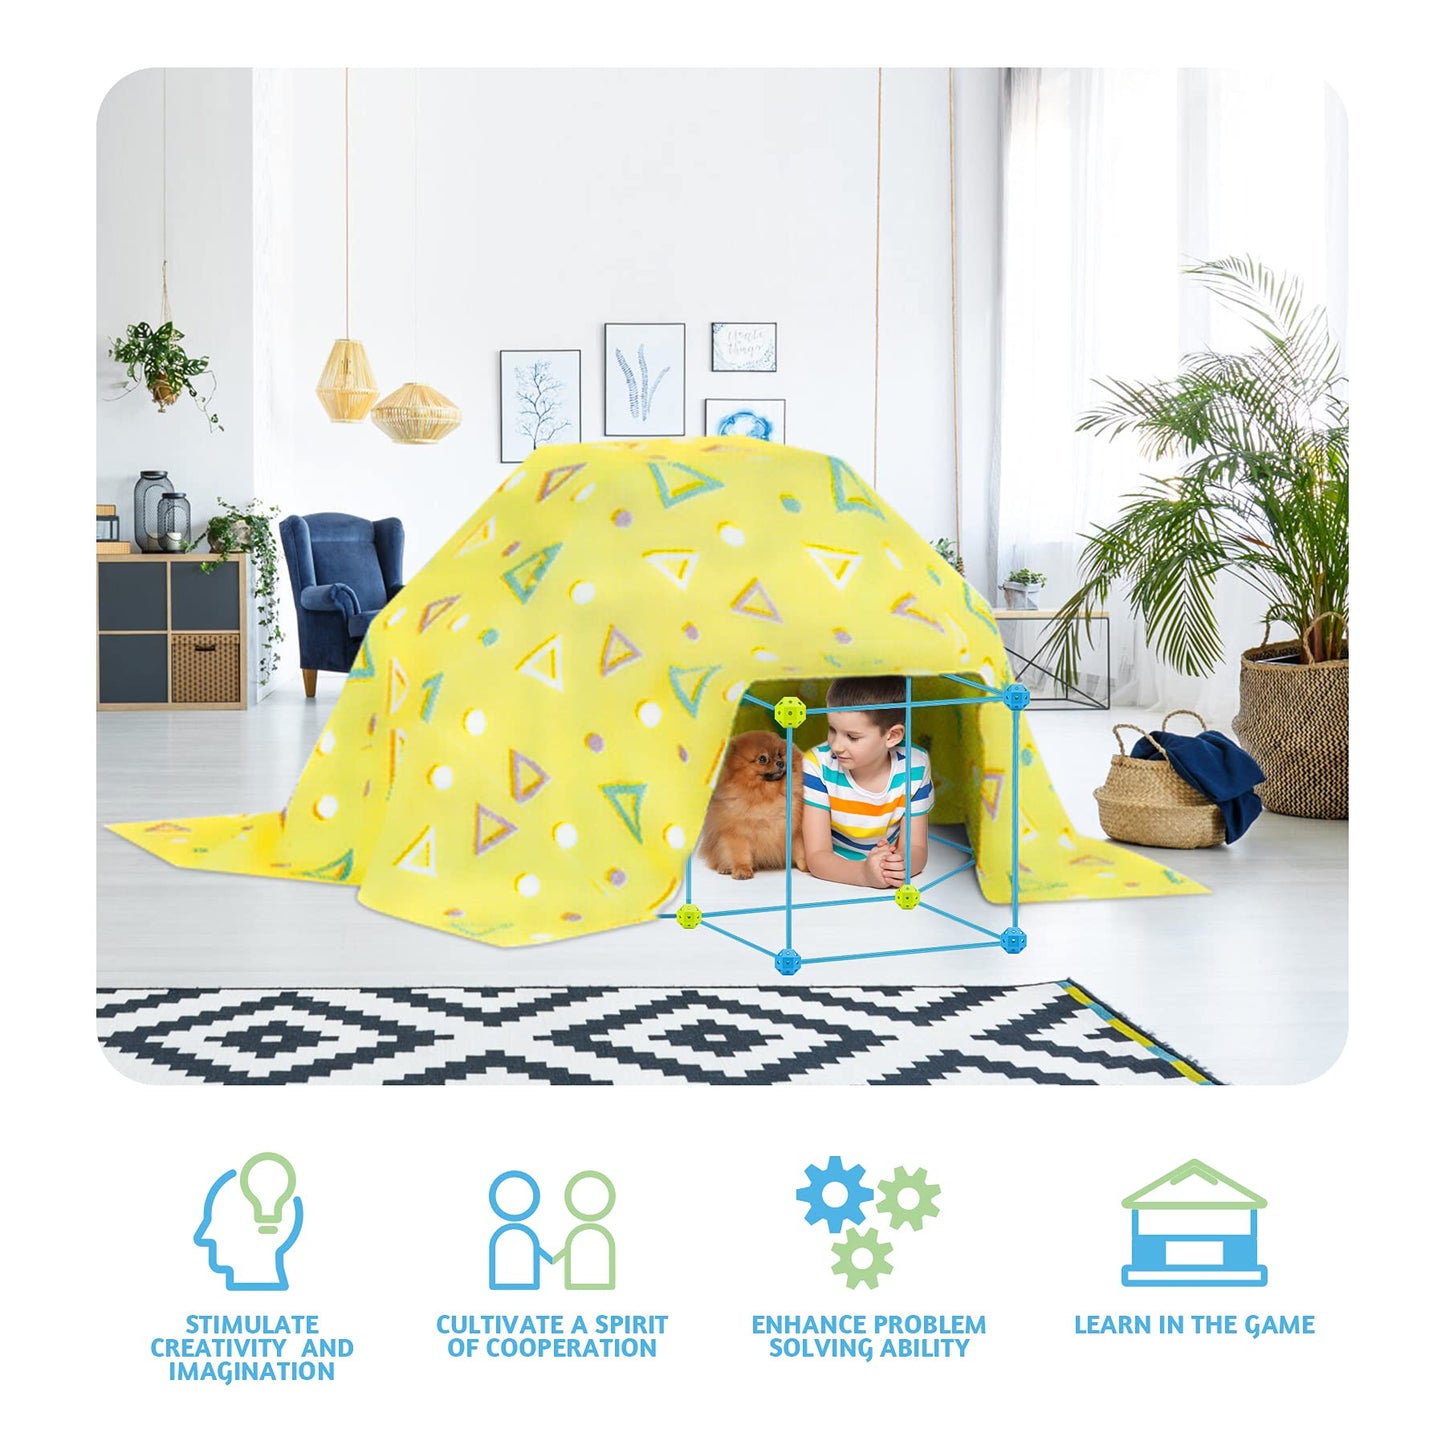 Children Creative Self-Assembly Tent Toy | Affordable Buy